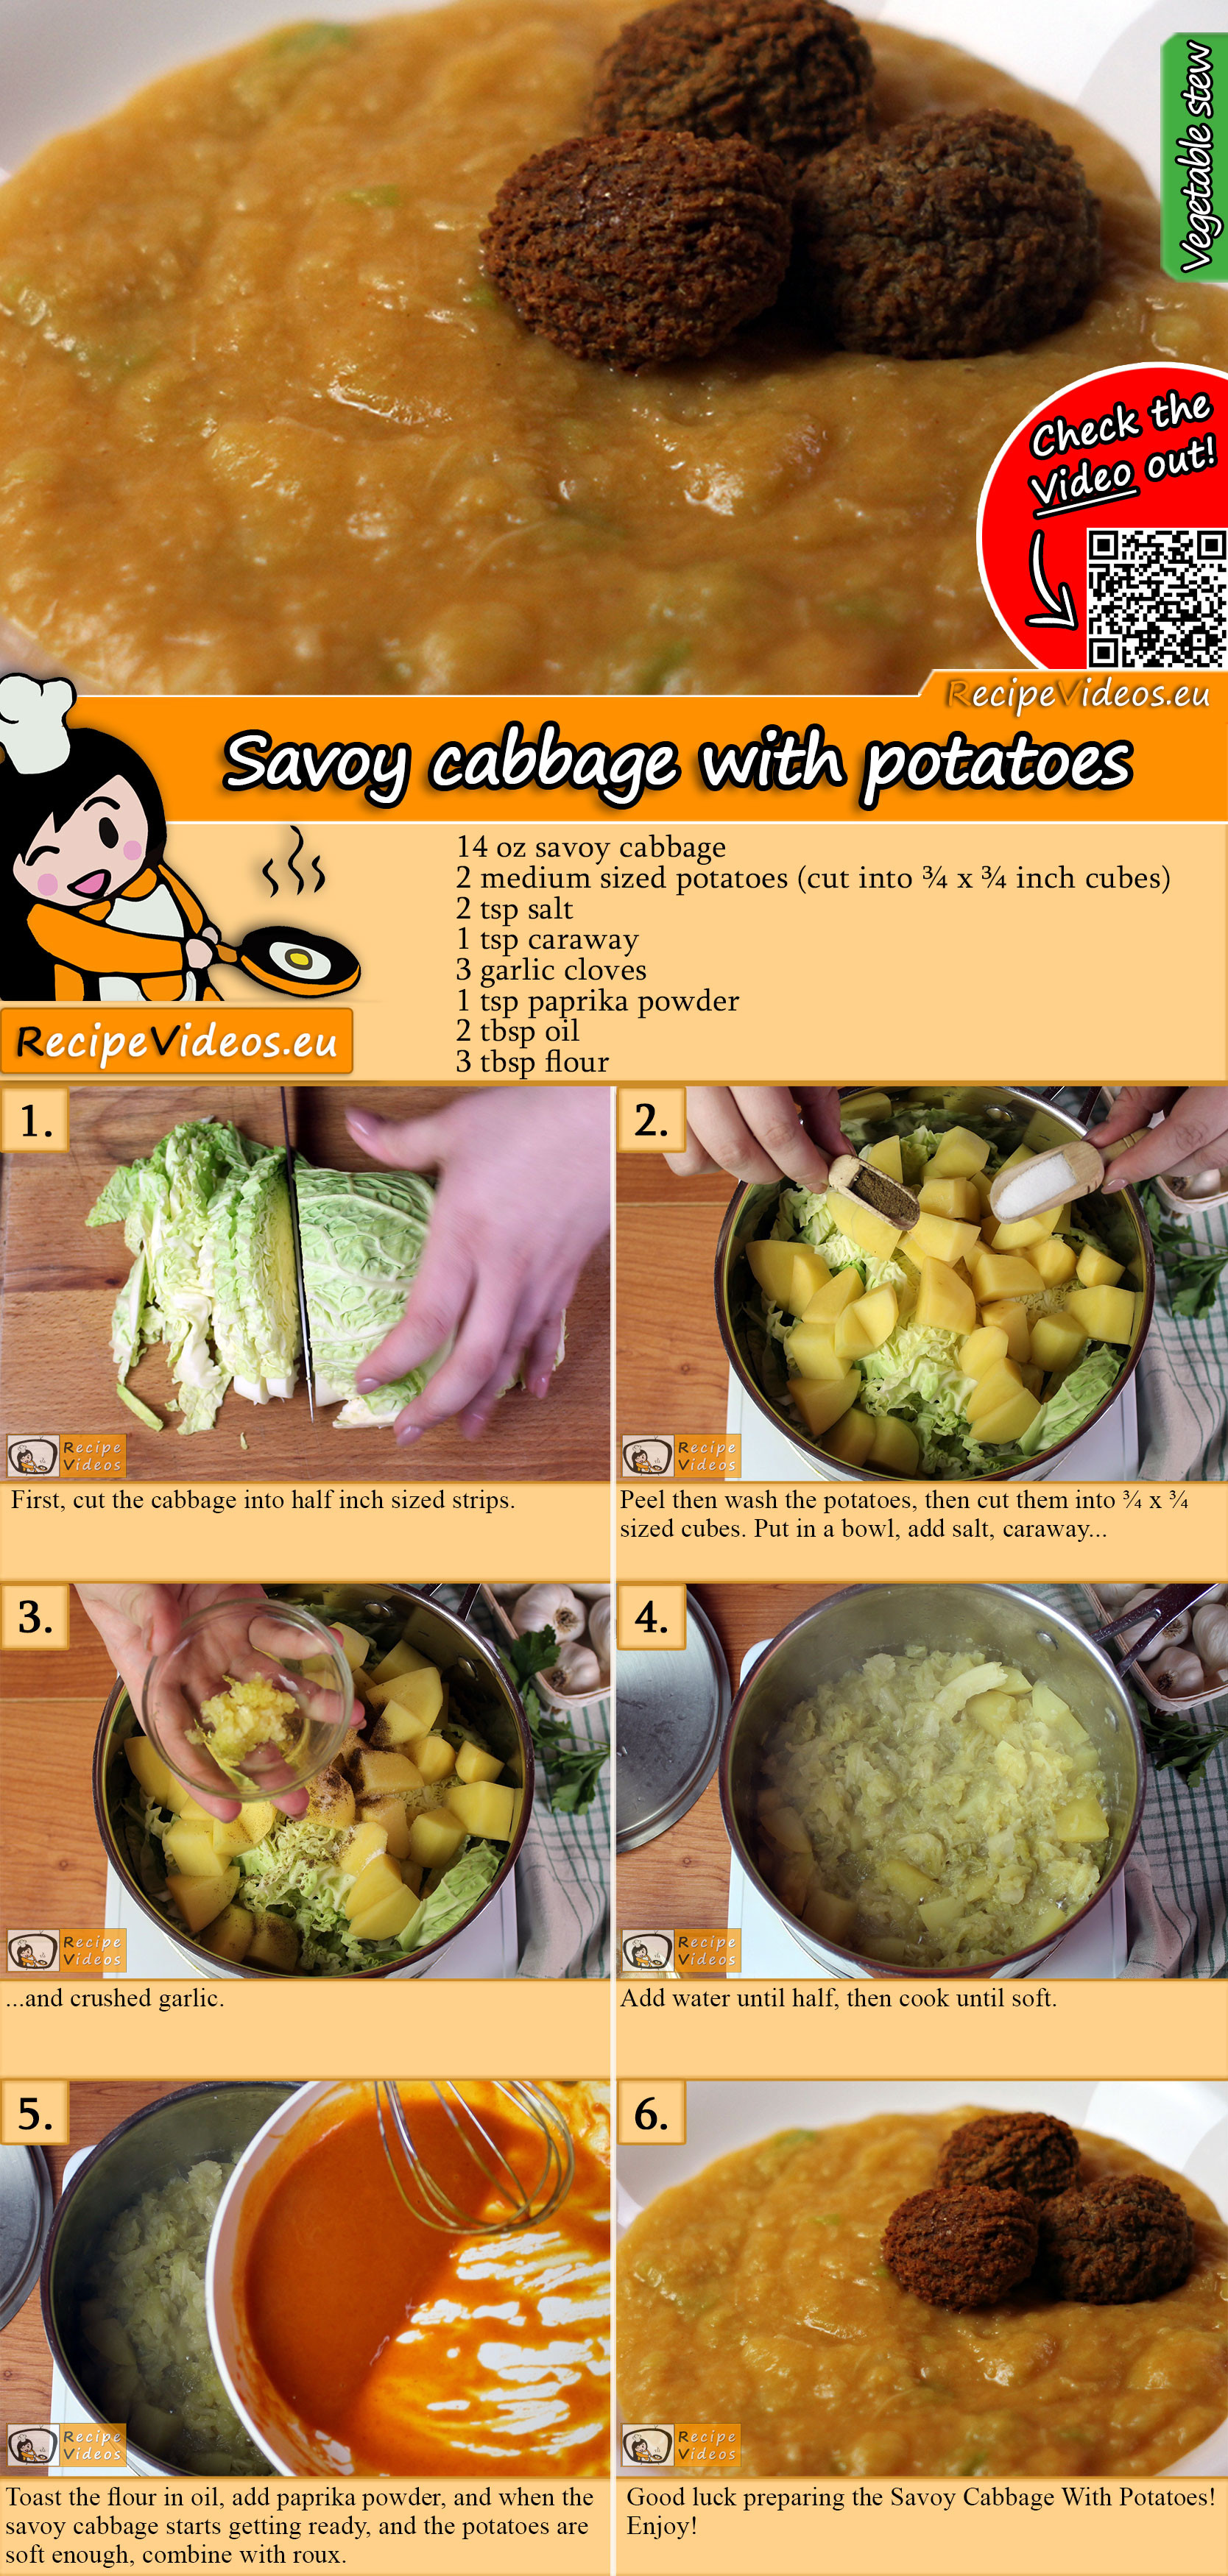 Savoy cabbage with potatoes recipe with video